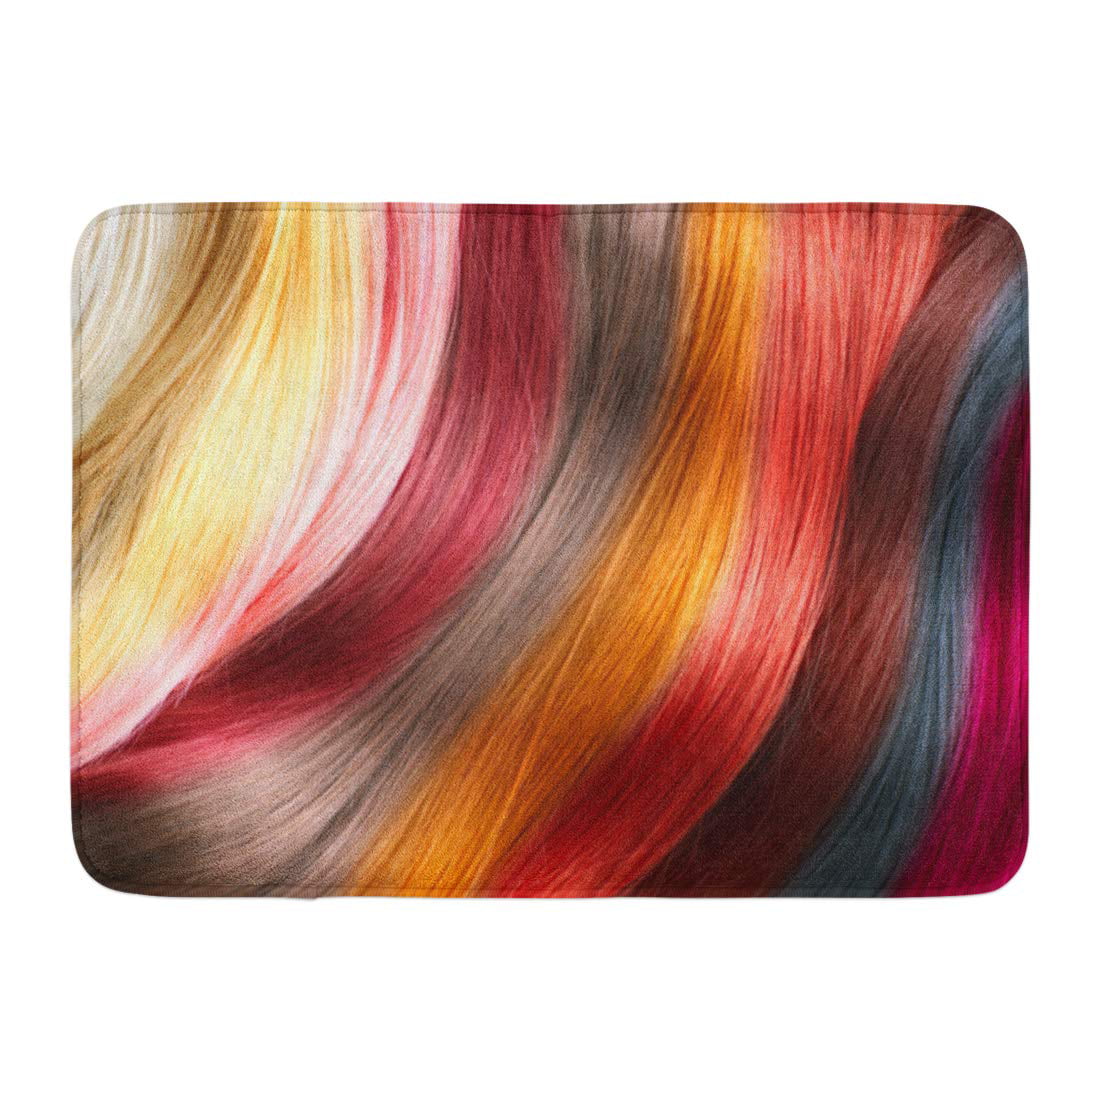 GODPOK Yellow Lock Red Dye Hair Colors Palette Colours